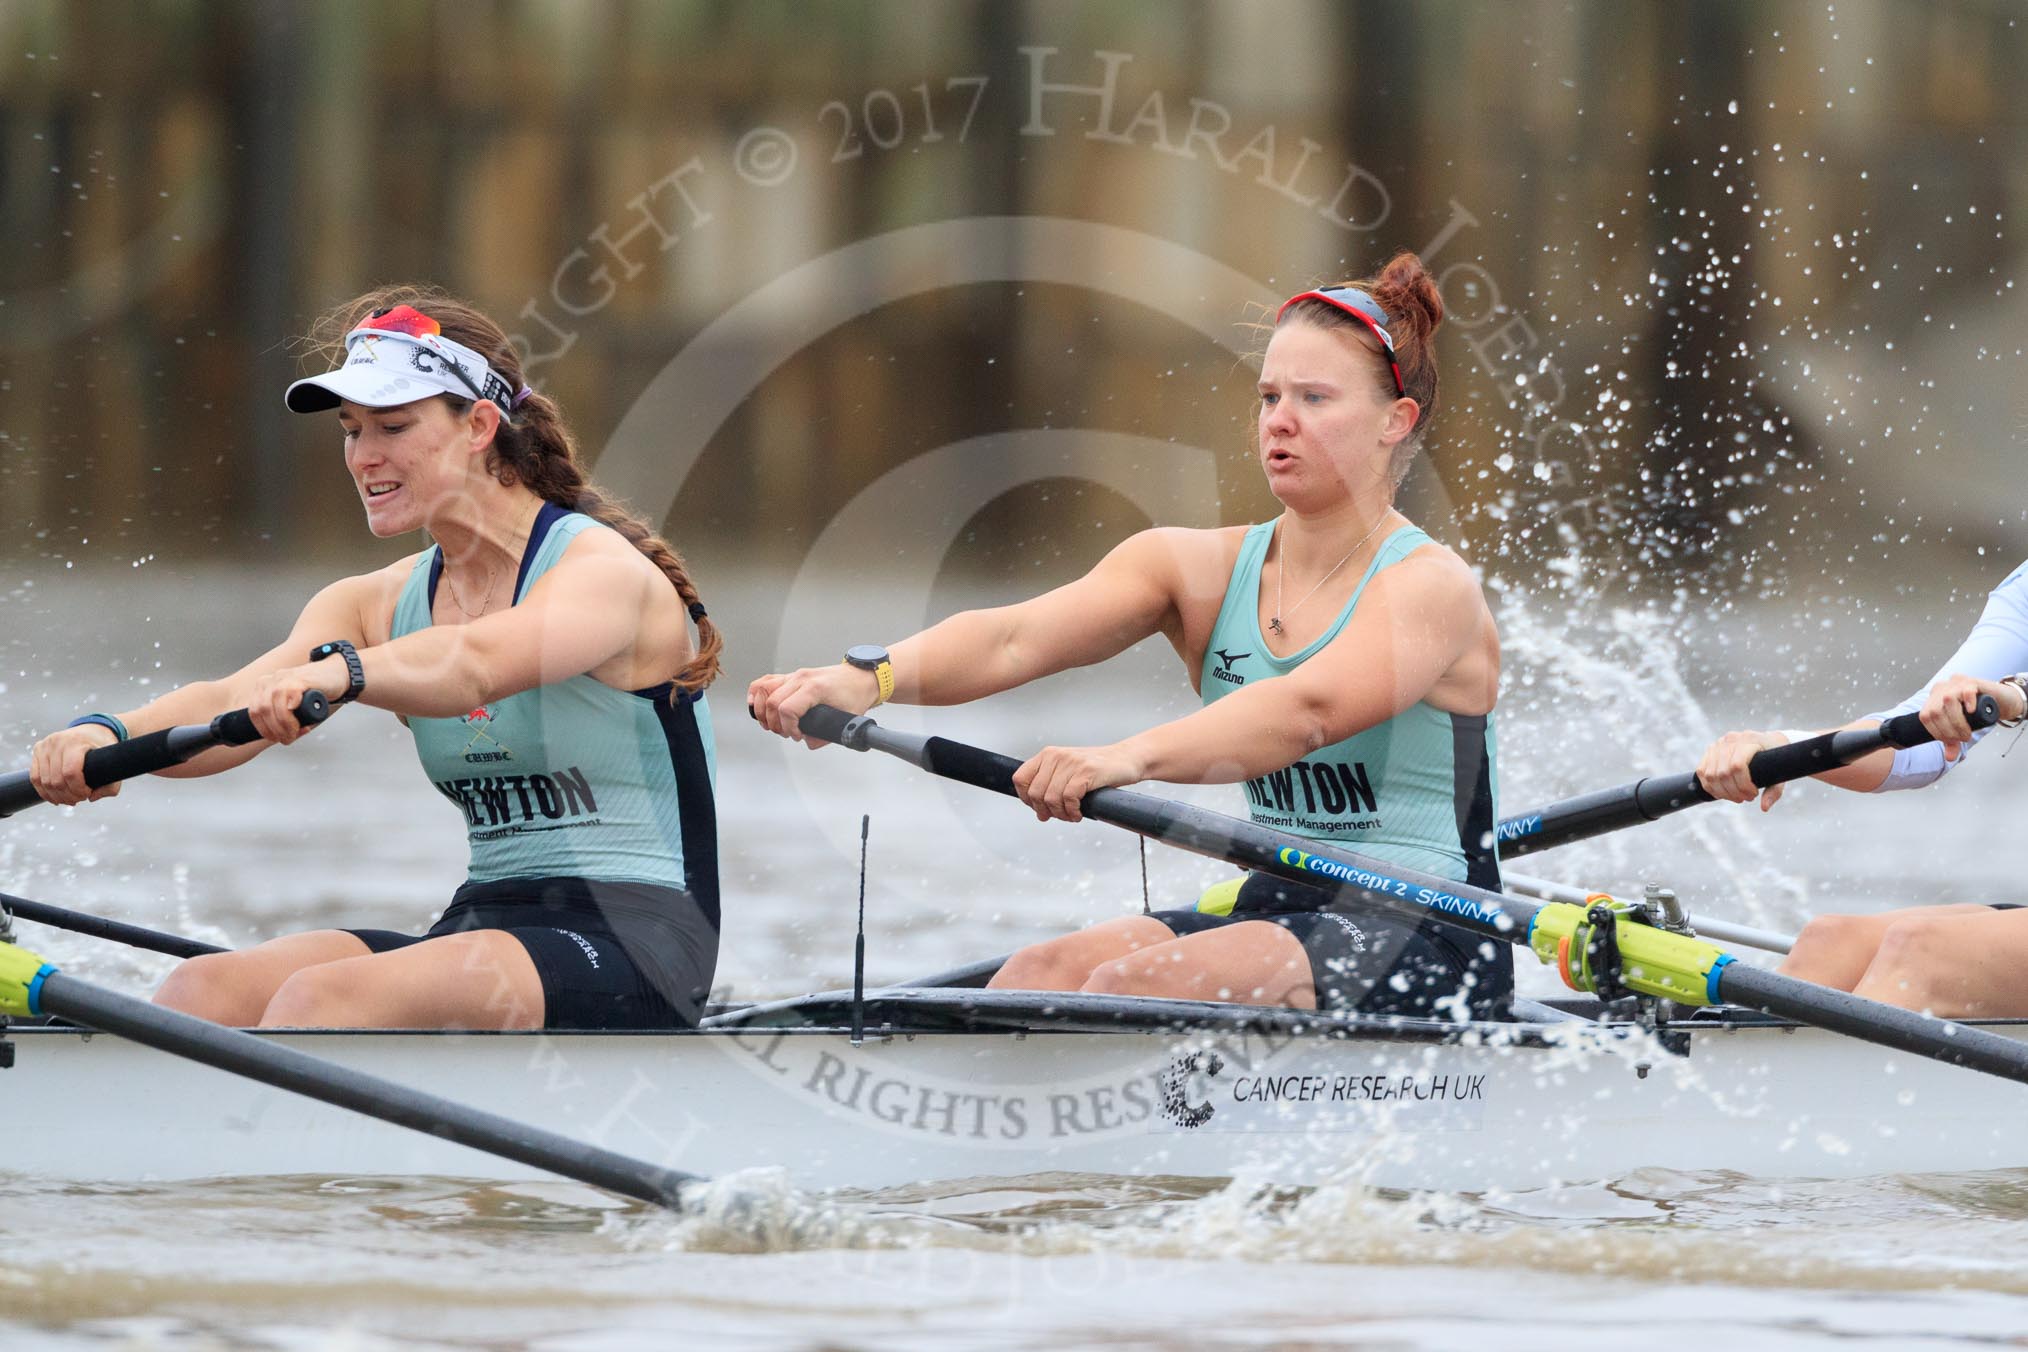 The Boat Race season 2018 - Women's Boat Race Trial Eights (CUWBC, Cambridge): Expecto Patronum after the start of the race, here 6 Thea Zabell, 5 Kelsey Barolak.
River Thames between Putney Bridge and Mortlake,
London SW15,

United Kingdom,
on 05 December 2017 at 12:43, image #58